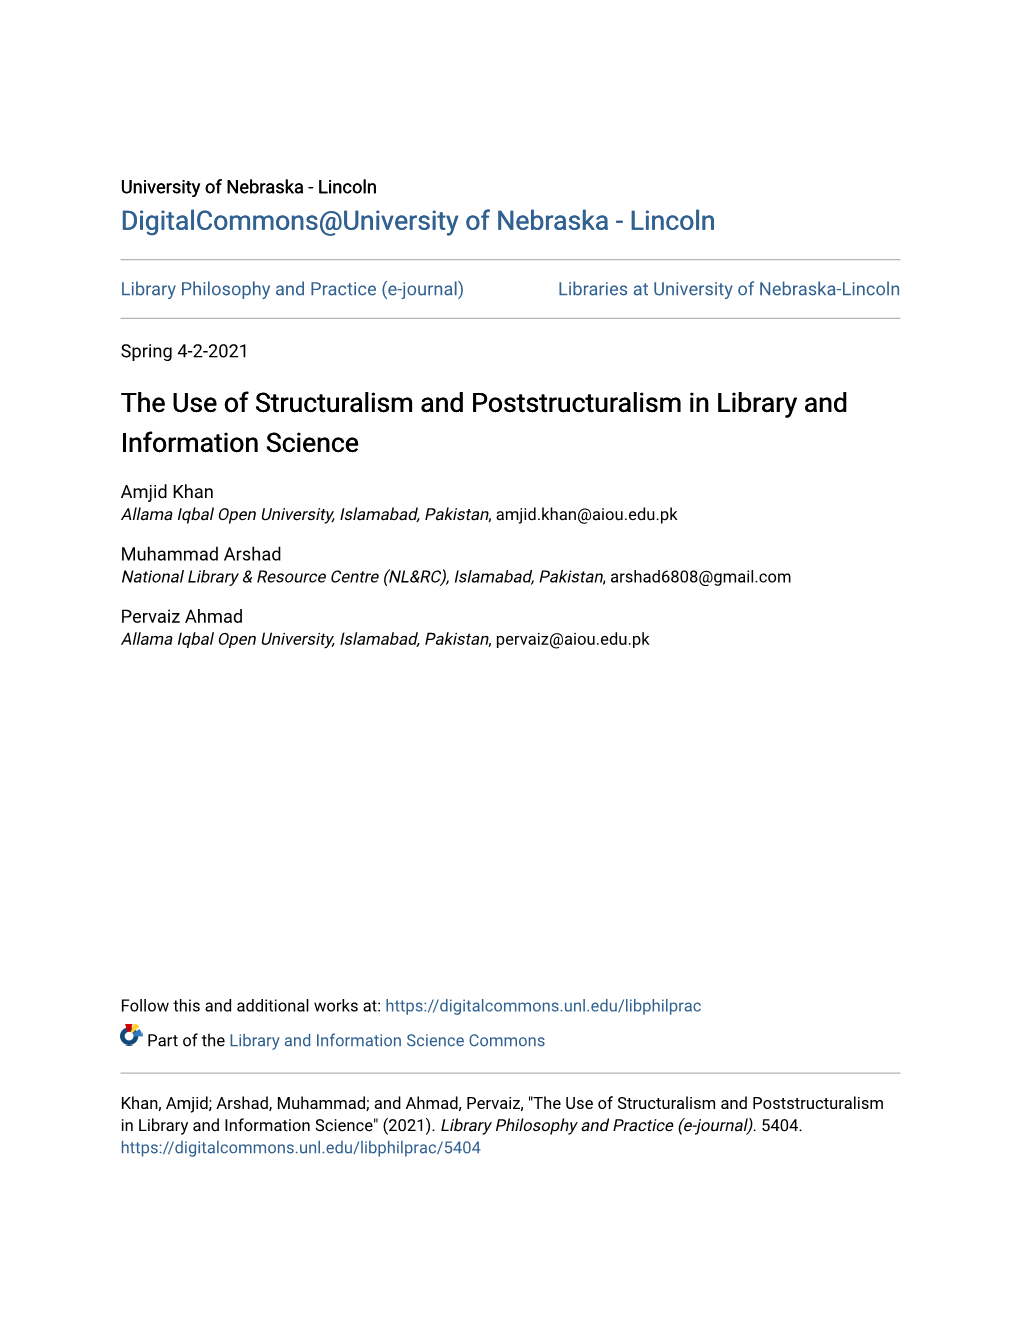 The Use of Structuralism and Poststructuralism in Library and Information Science